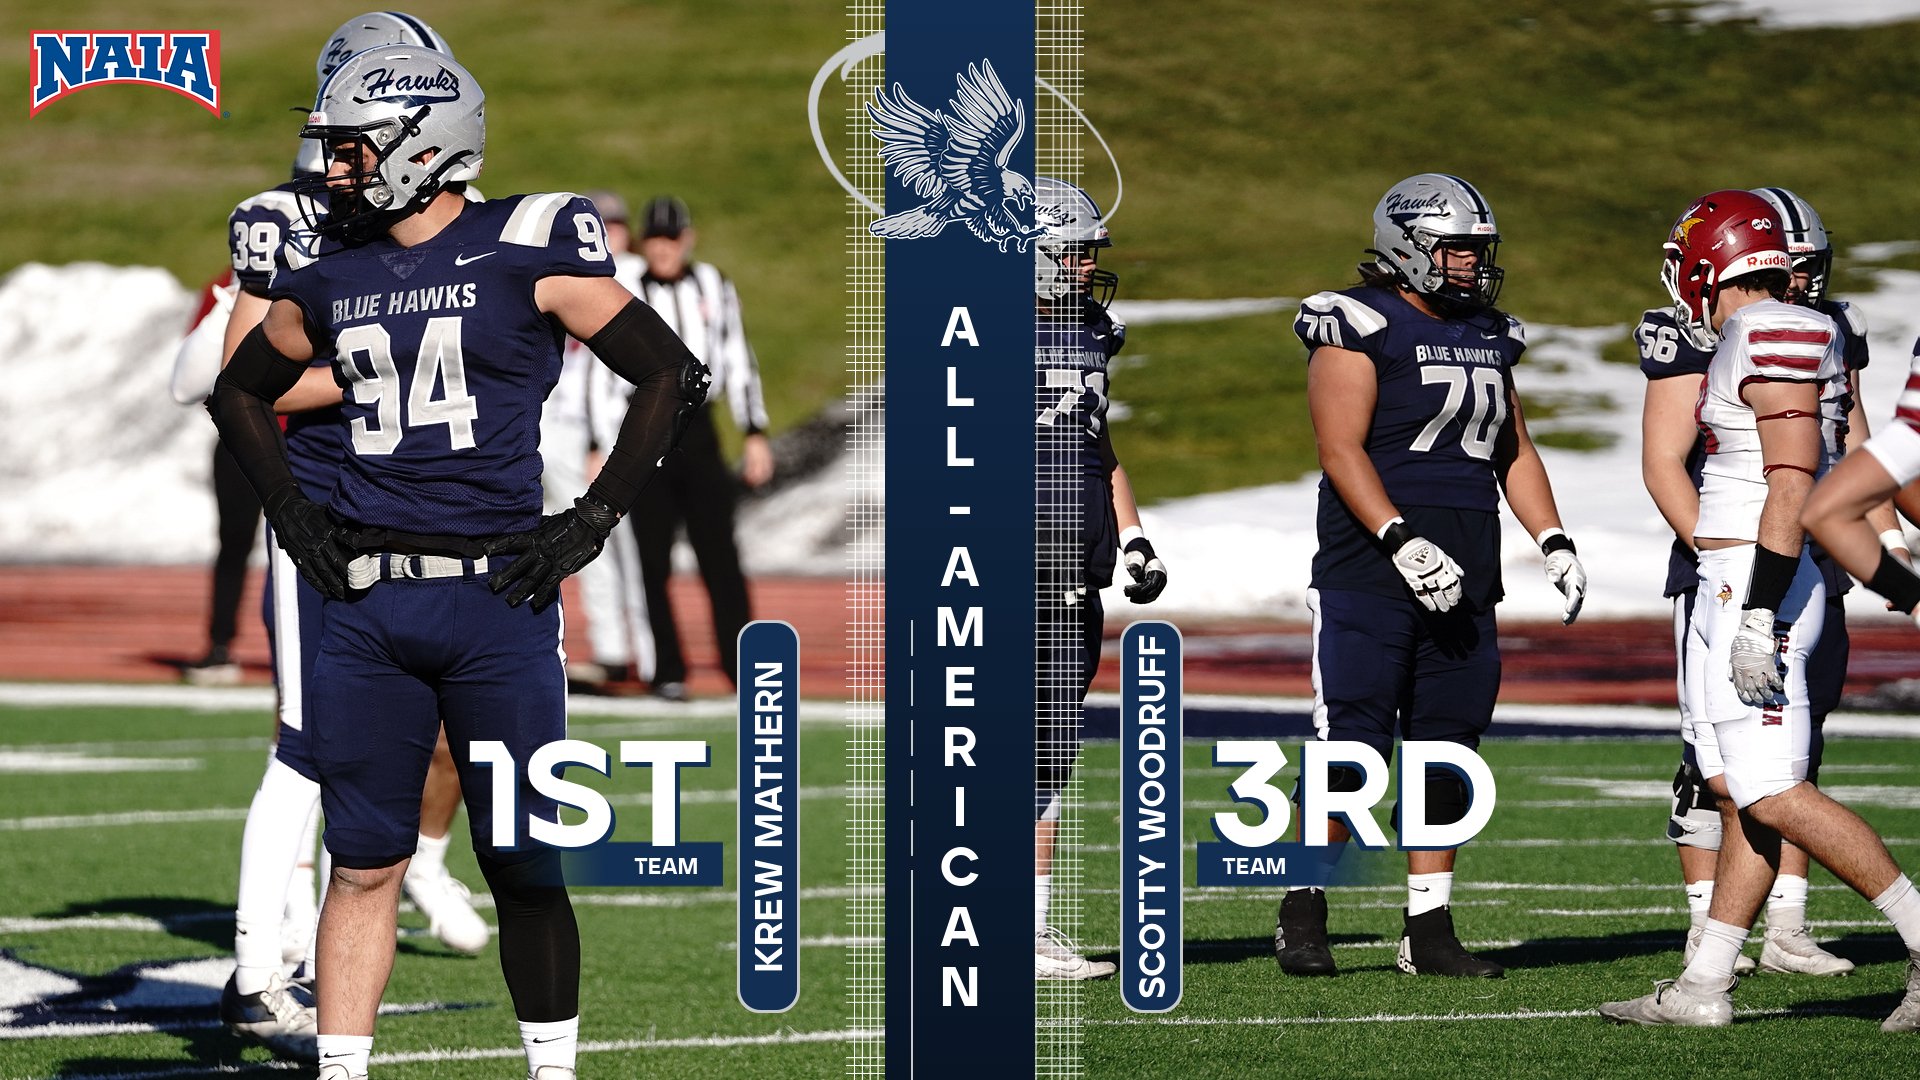 Mathern and Woodruff named AFCA All-Americans